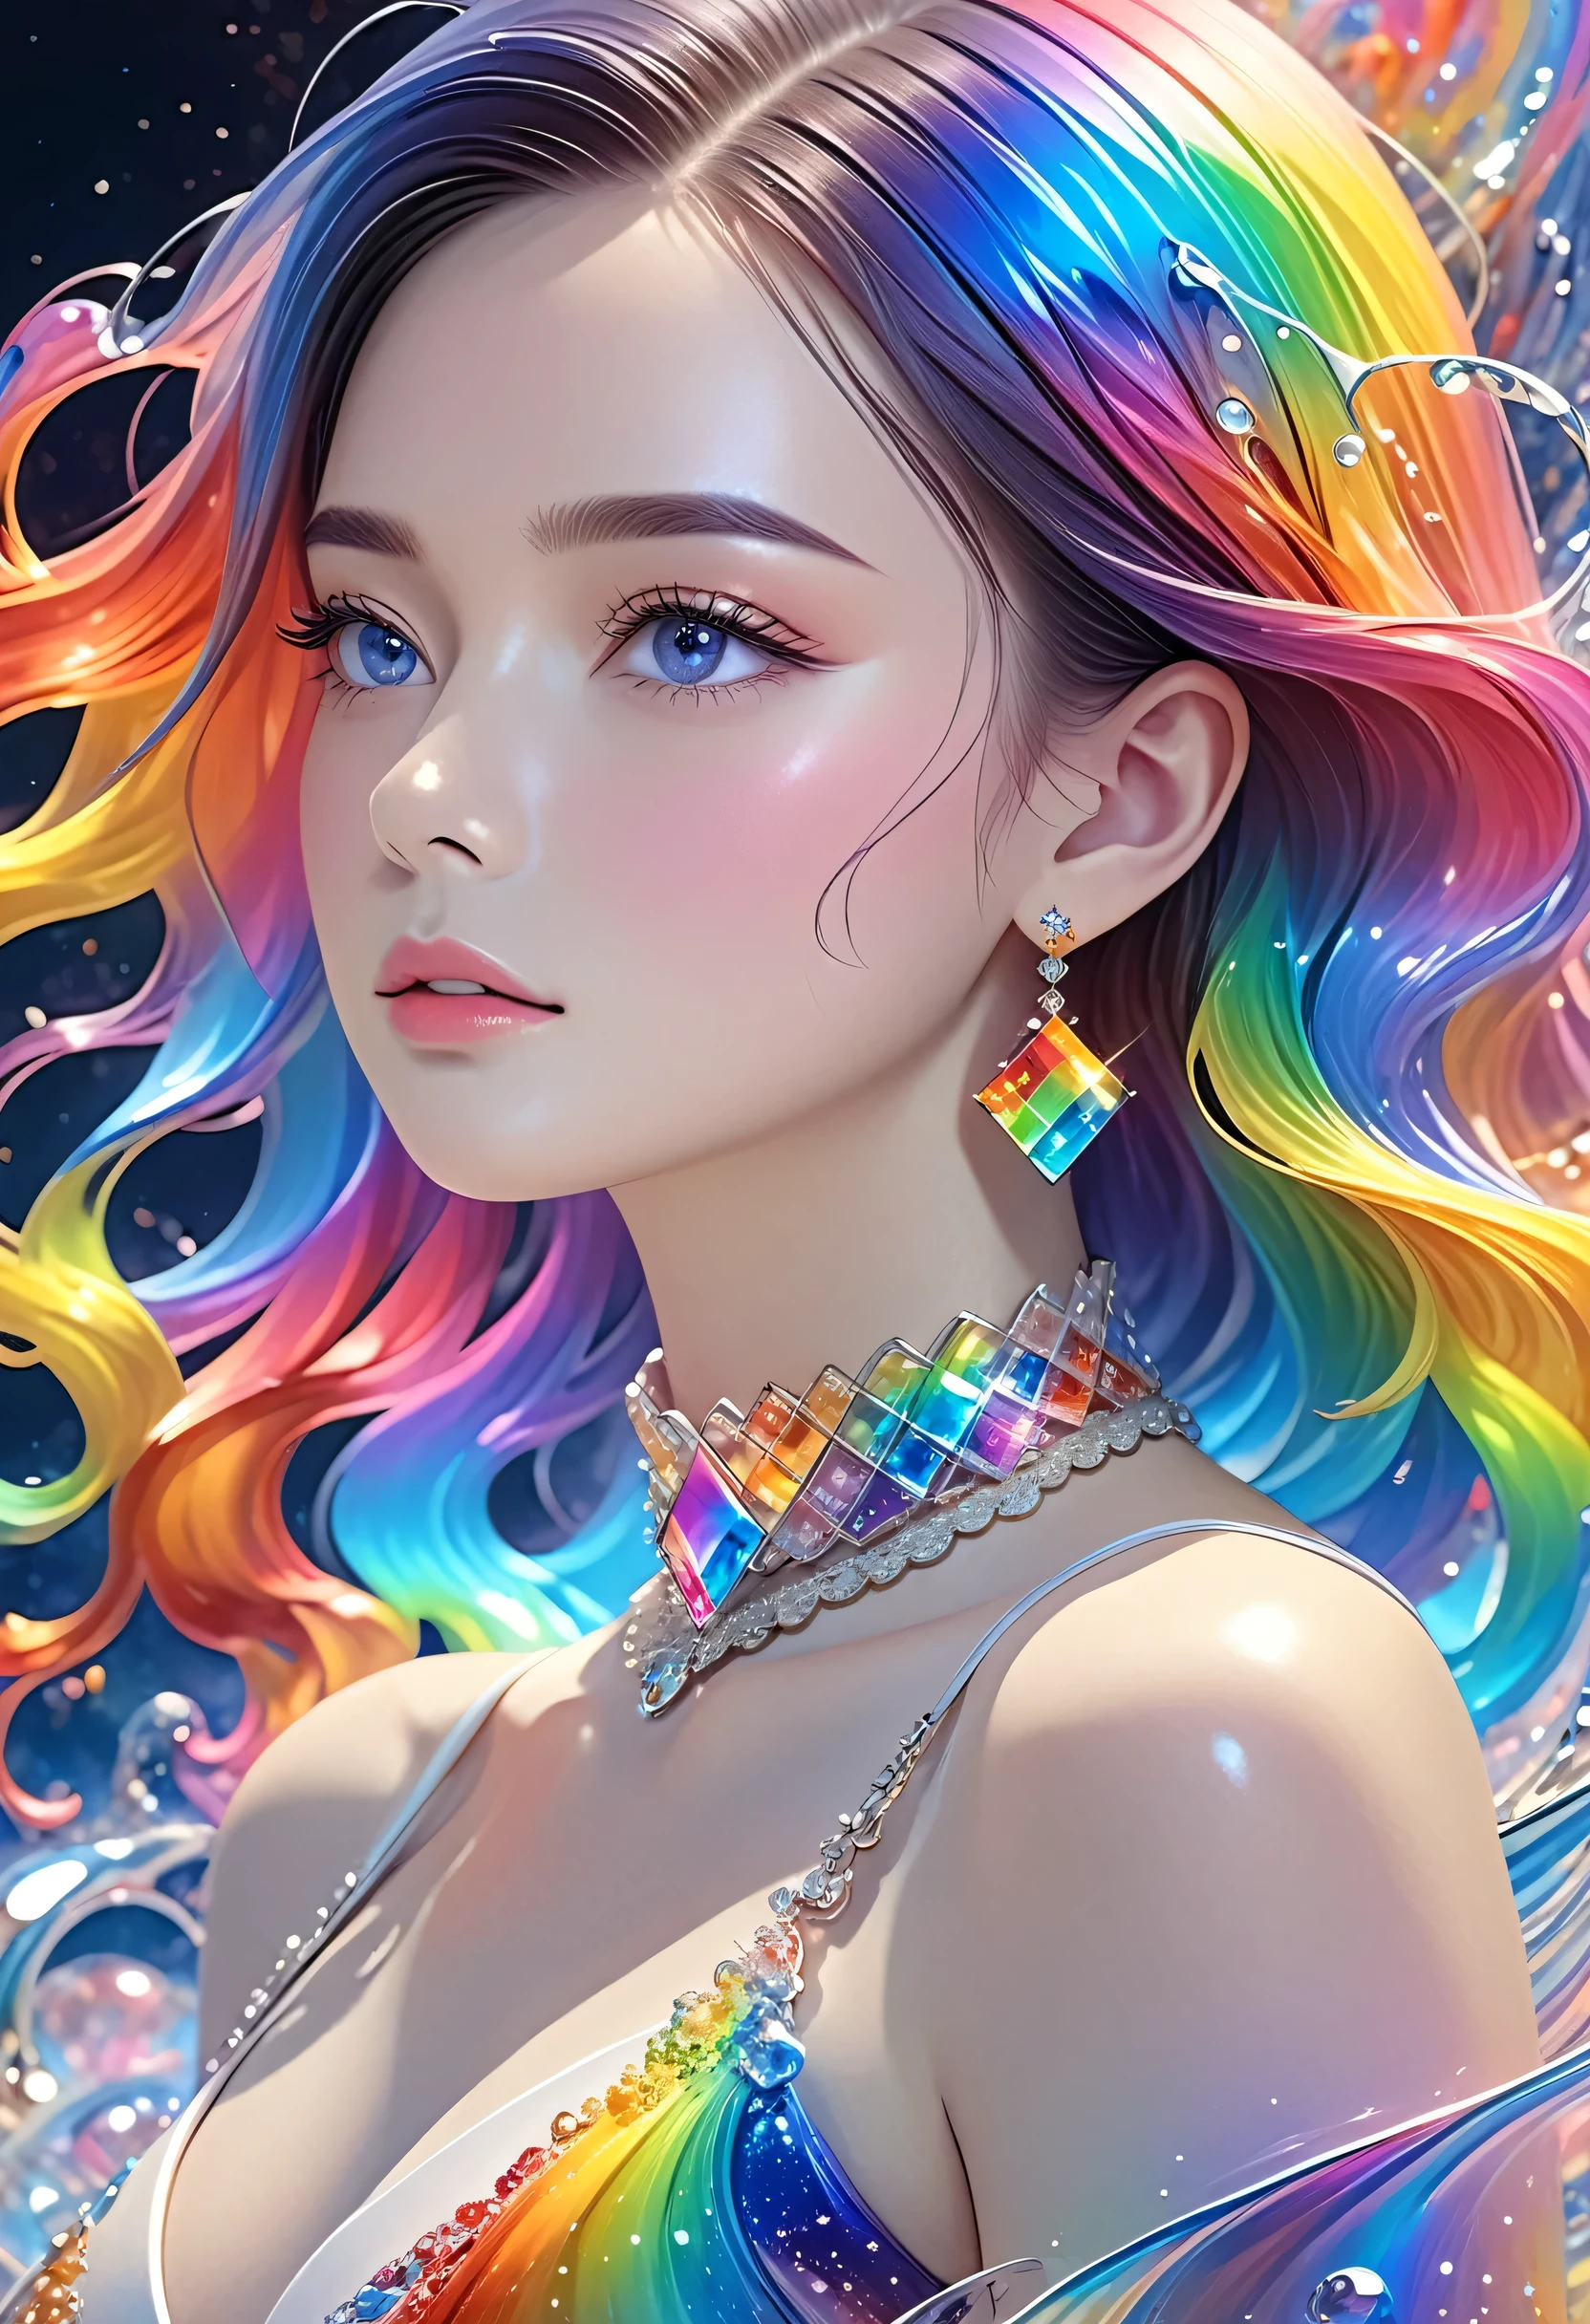 A beautiful young woman，Extremely detailed，Rich details，Jewelry，Jewelry，have， Mysterious Waves at Night. 3D. Rainbow Colors. The beauty of the melting universe. Surrealism in Nebula Reflections,32k